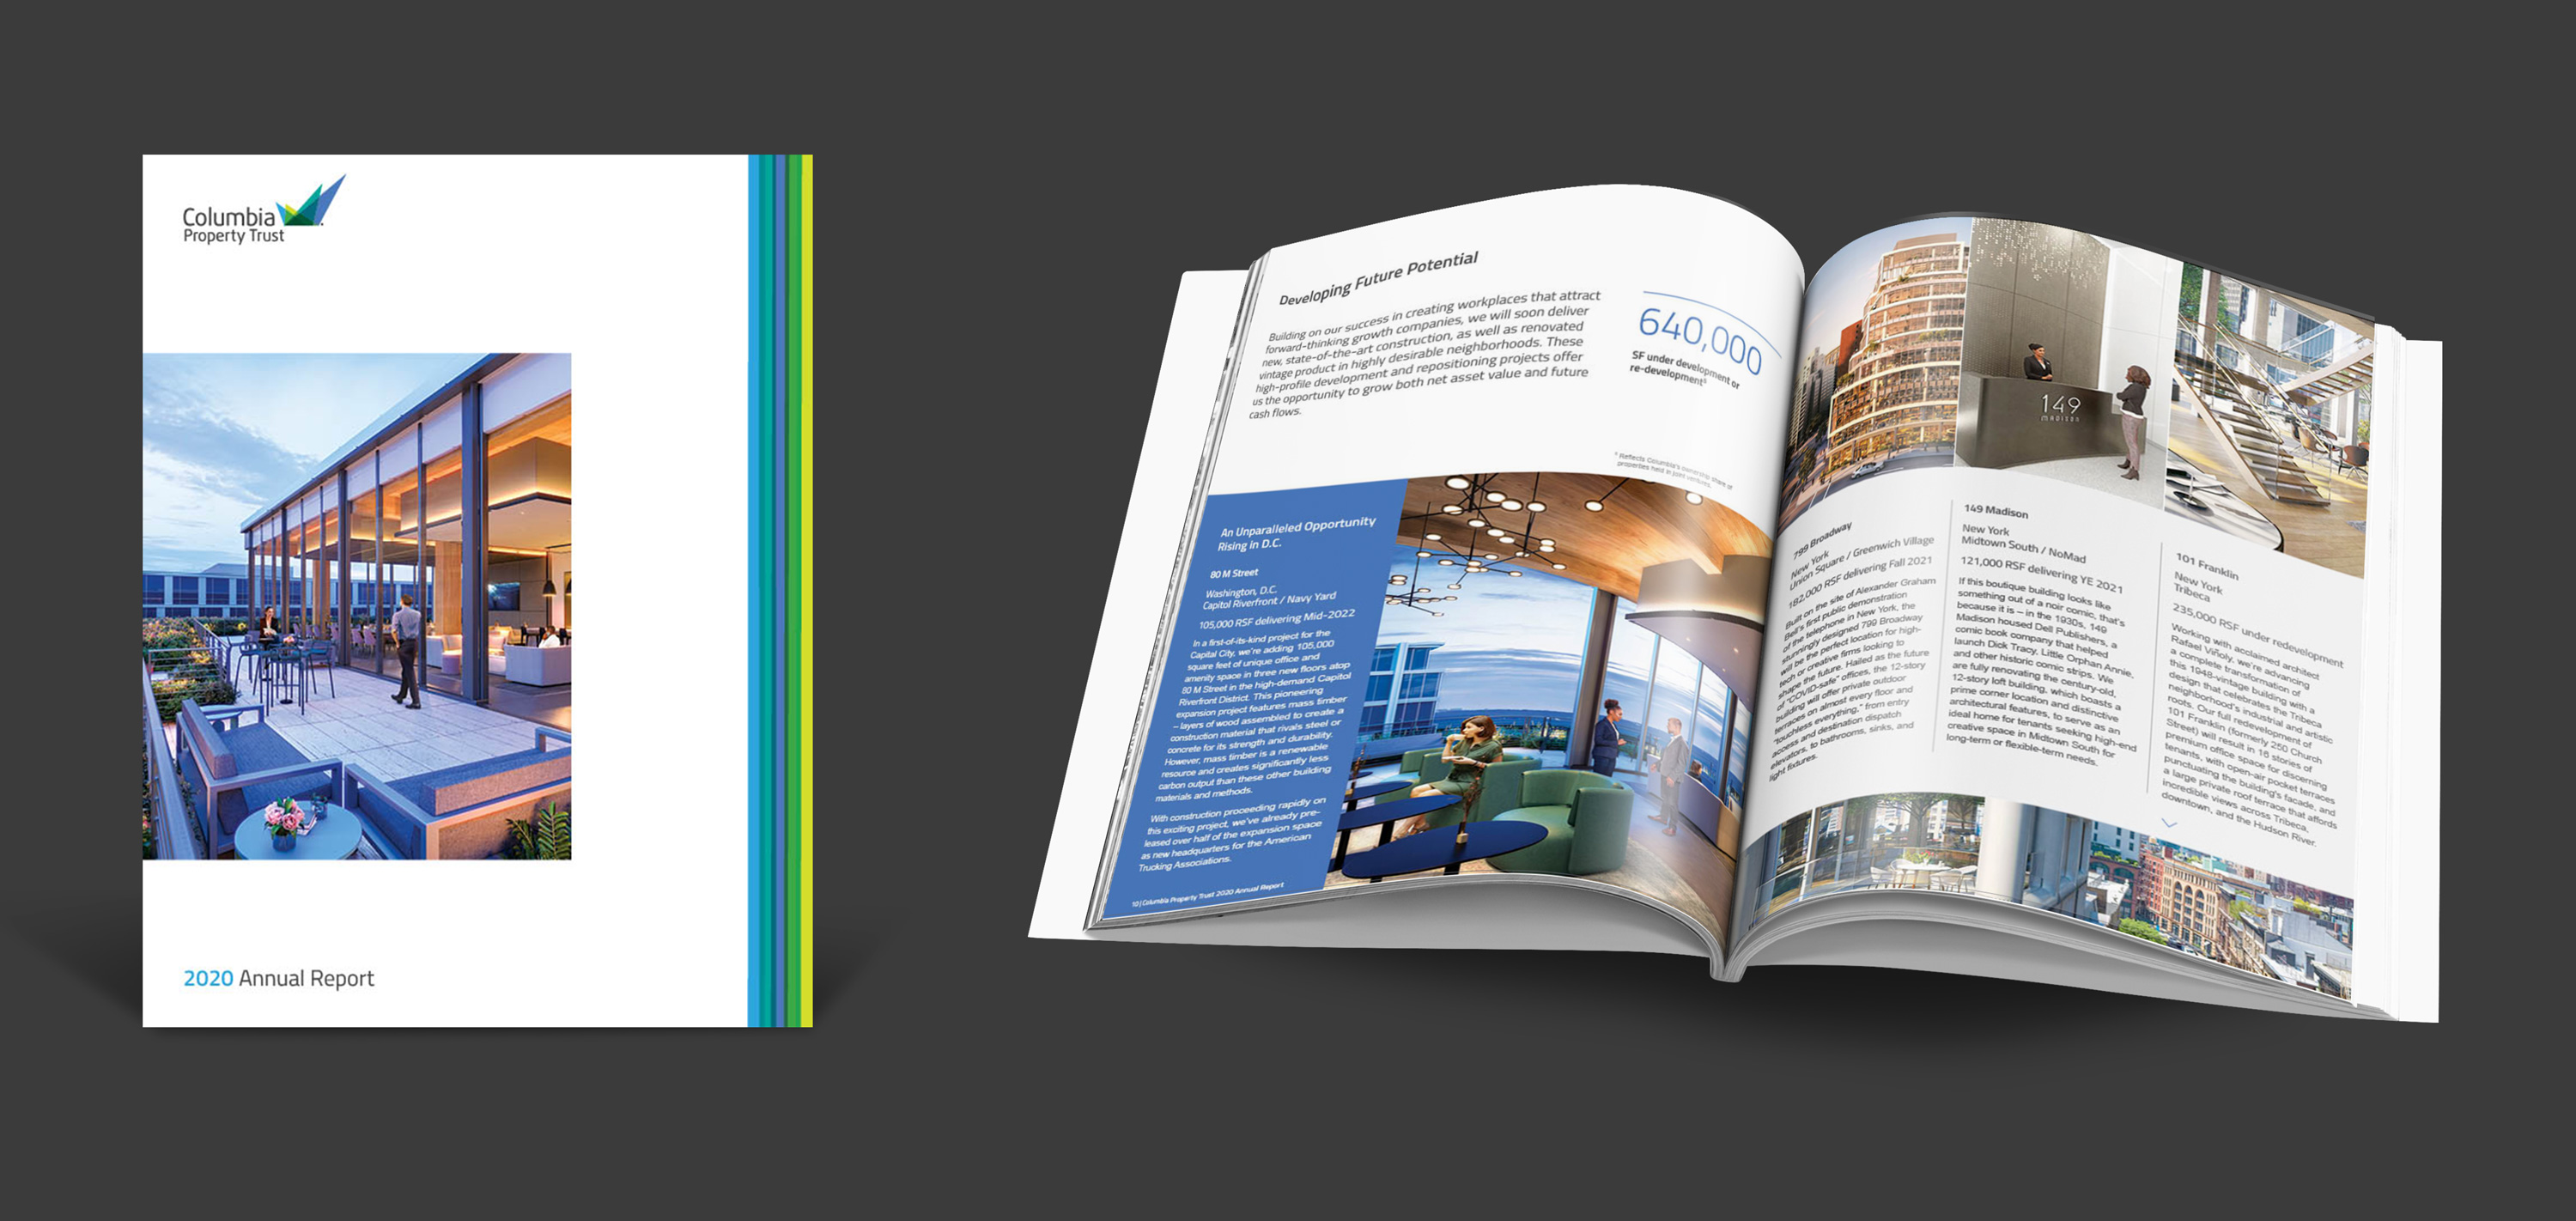 a cover and spread of the CXP annual report